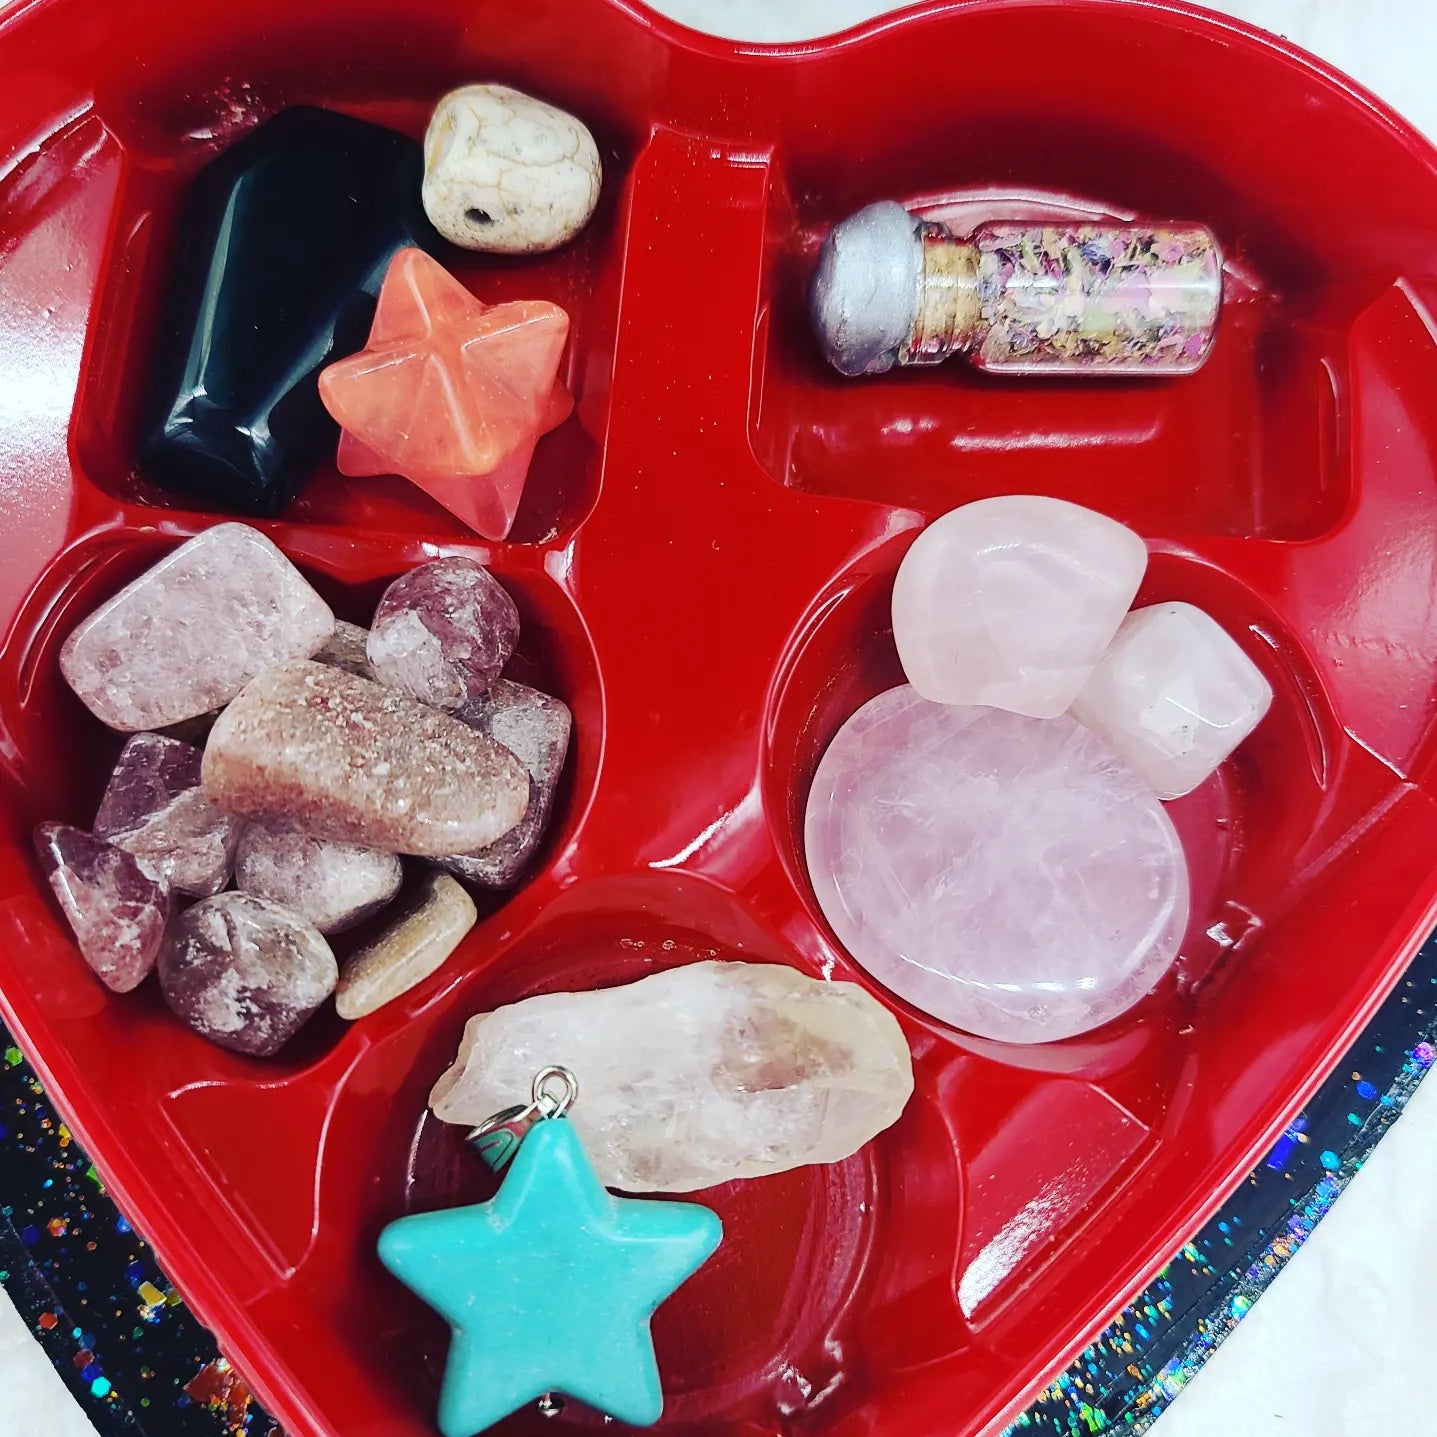 You are more BADASS than you know Collage Mixed Media Heart Shaped Trinket Box ~ Love Magick ~ Filled with Goodies ~ OOAK Box plus Mini Spell Jar, and Crystals ~ Valentine's Day Gift